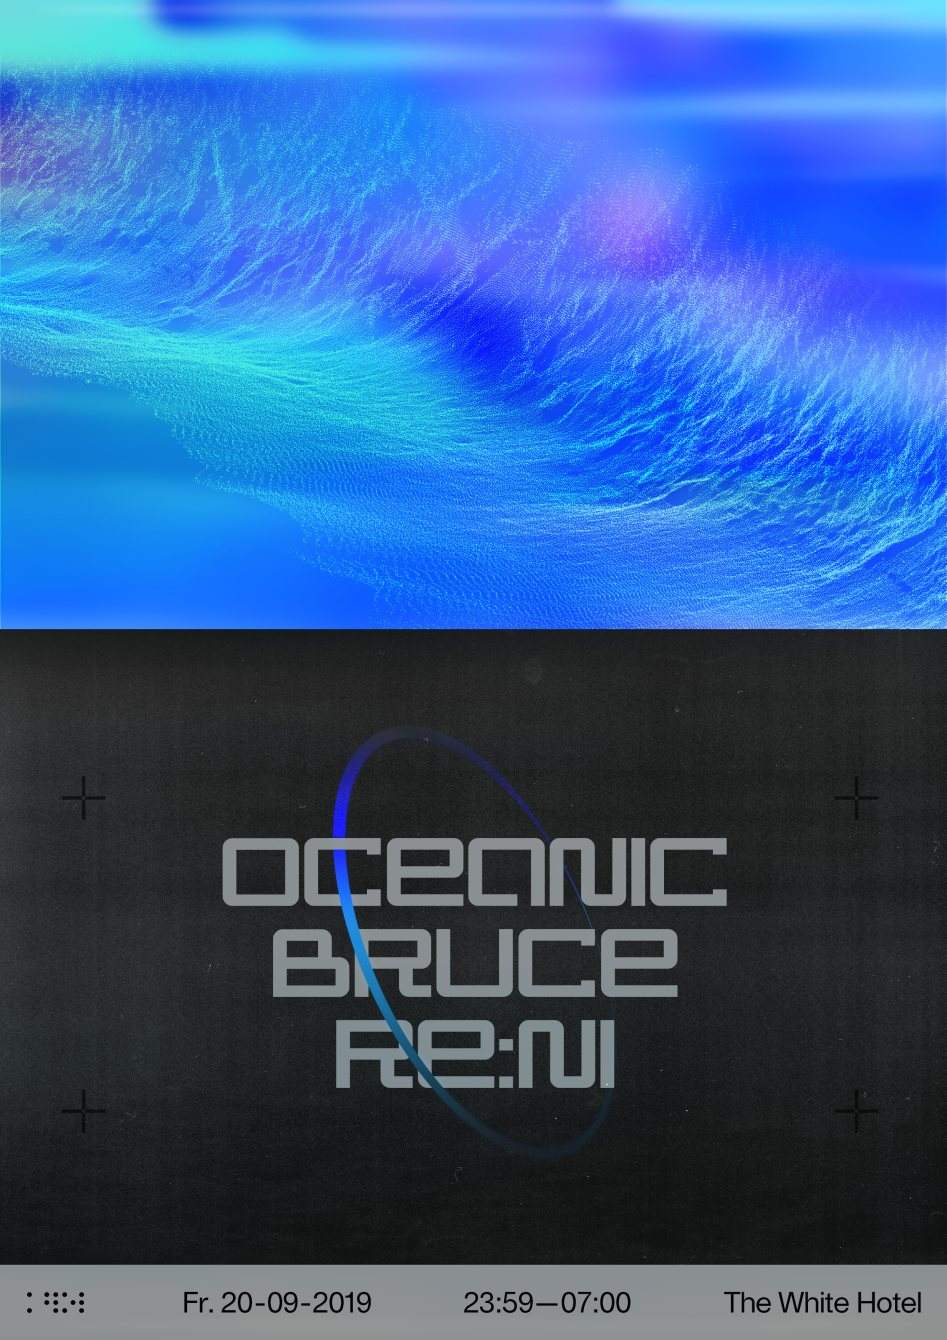 Oceanic / Bruce / re:ni - Flyer front